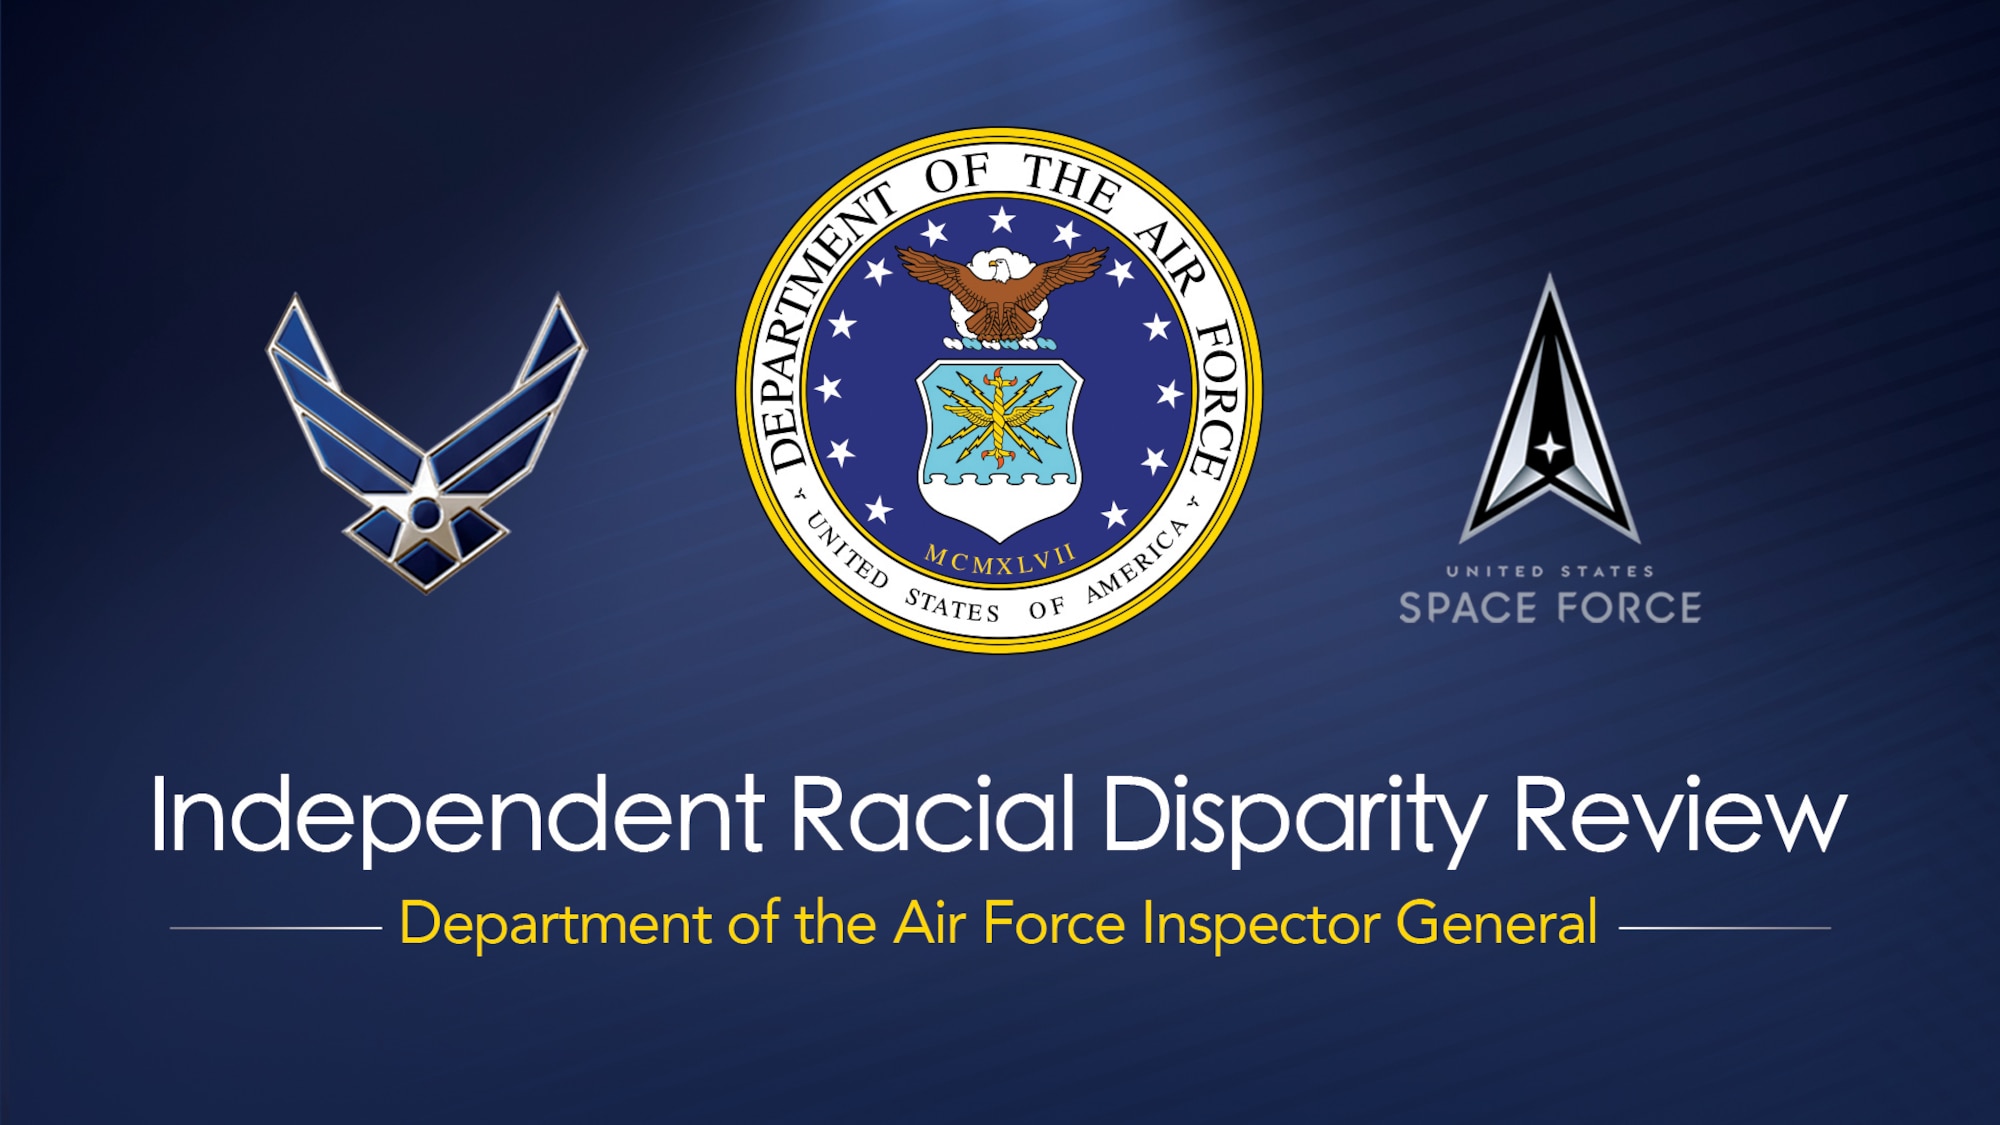 (U.S. Air Force courtesy graphic)